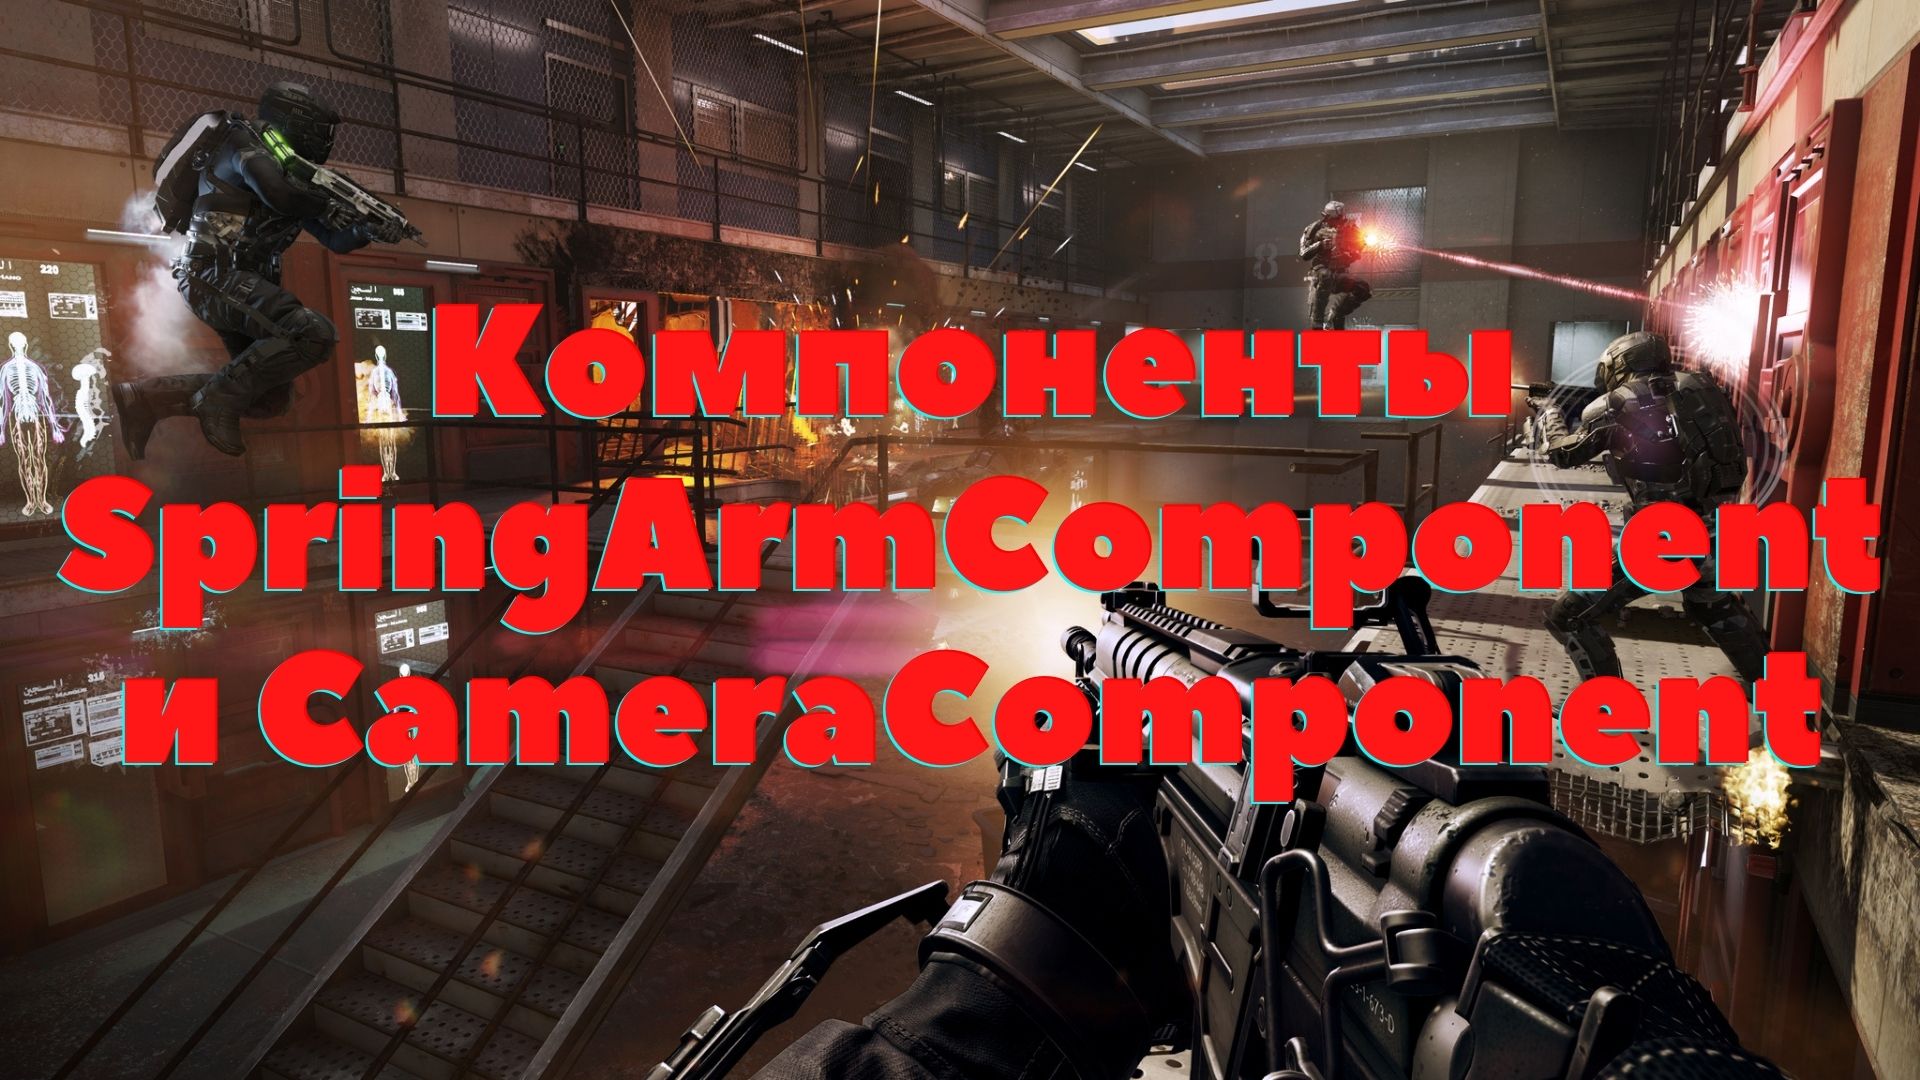 3. Shooter Unreal Engine 4 | C++| SpringArmComponent и CameraComponent